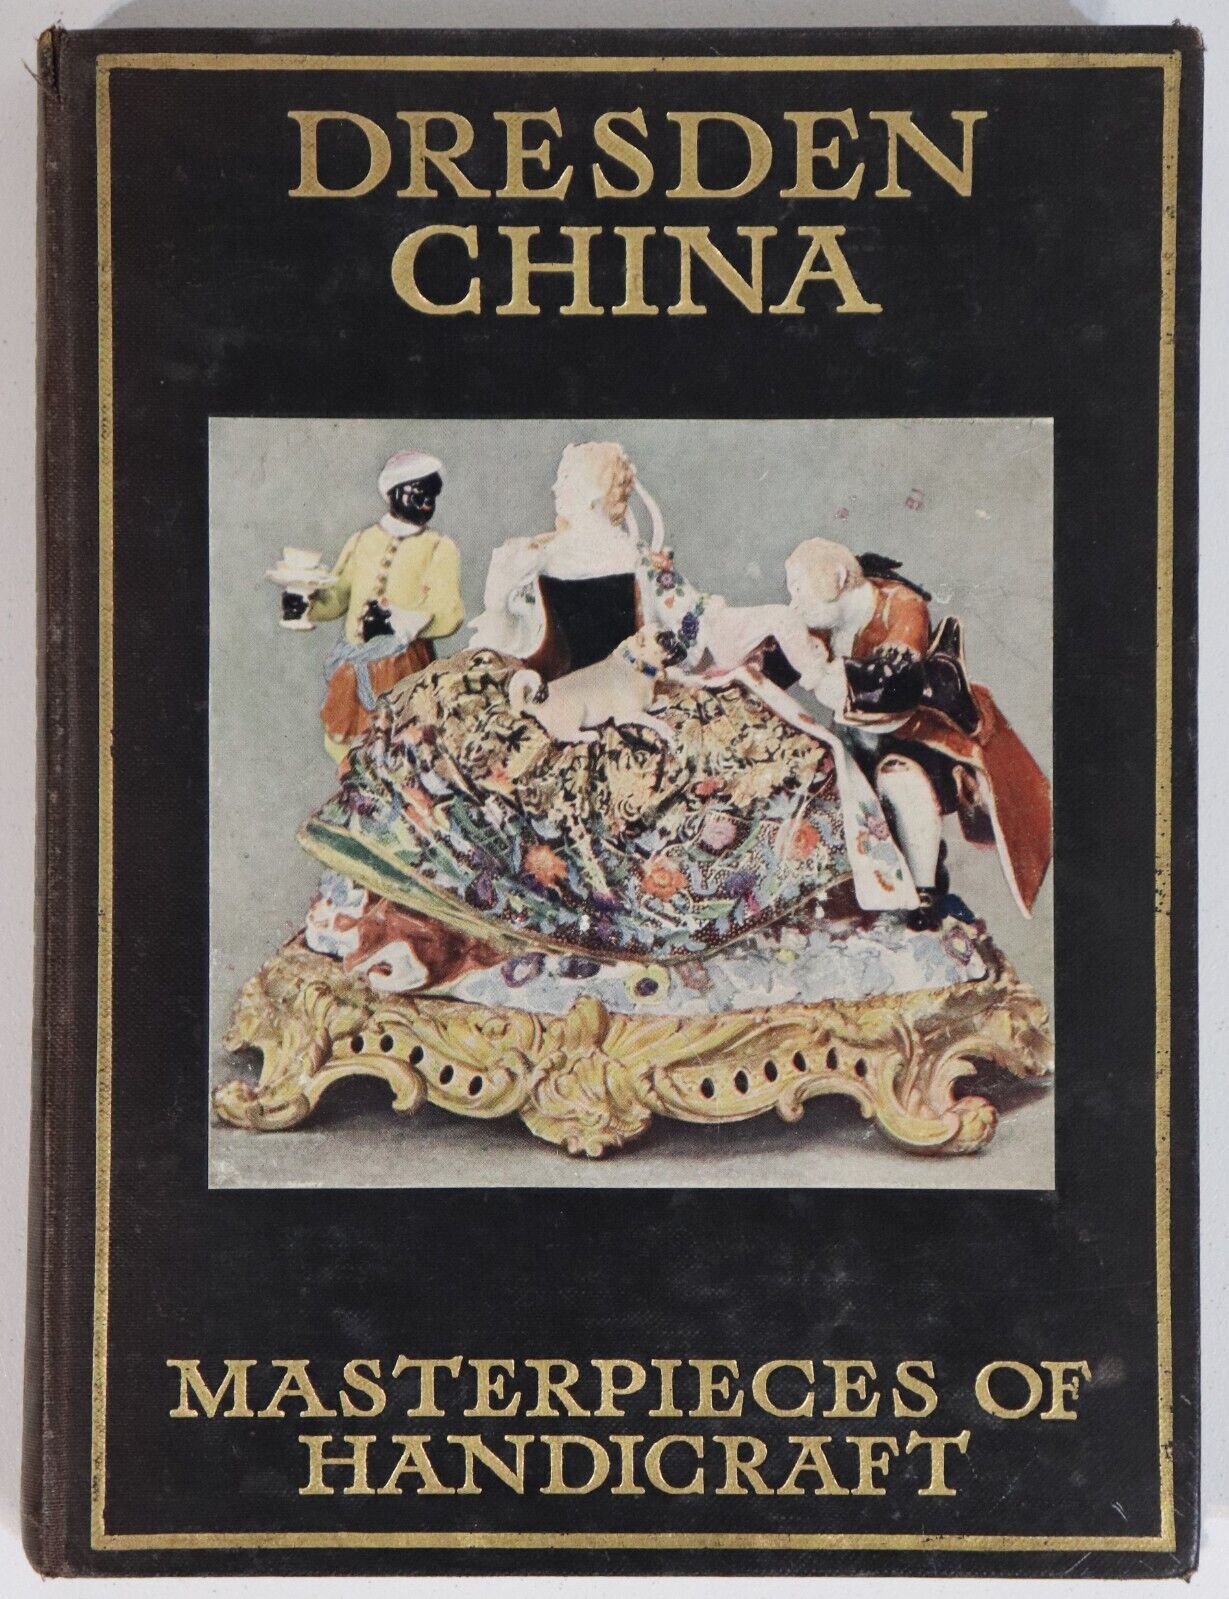 Dresden China by Egan Mew - c1909 - Antique Porcelain Collectible Reference Book